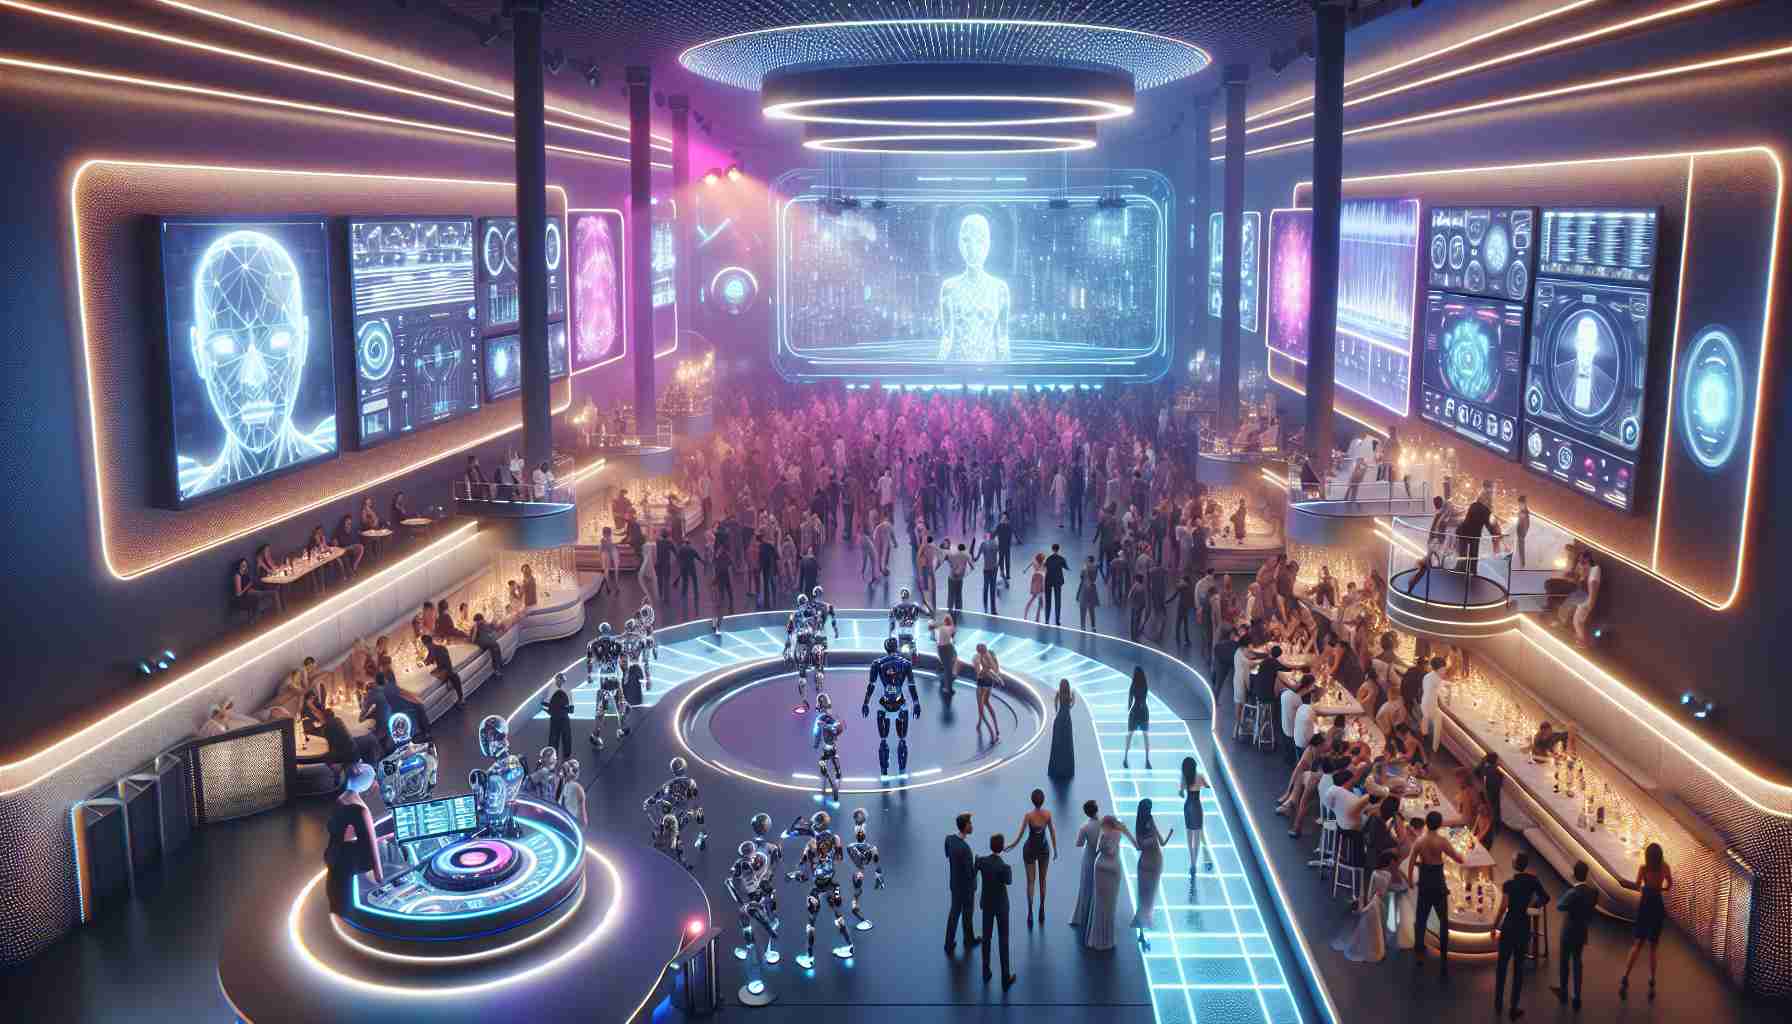 Realistic HD rendering of a futuristic nightclub scene illustrating the intersection of artificial intelligence and entertainment. The setting includes a dance floor lit with glowing neon lights, and an AI-driven DJ console operating autonomously. The crowd is diverse, consisting of people from different descents like Caucasian, Hispanic, Middle-Eastern, South Asian etc., and genders, all engrossed in the music and the multi-sensory, technologically-advanced atmosphere. Various AI robots cater to guests, serving drinks and managing security. Advanced holographic displays and digital art installations add to the air of an entertainment revolution.